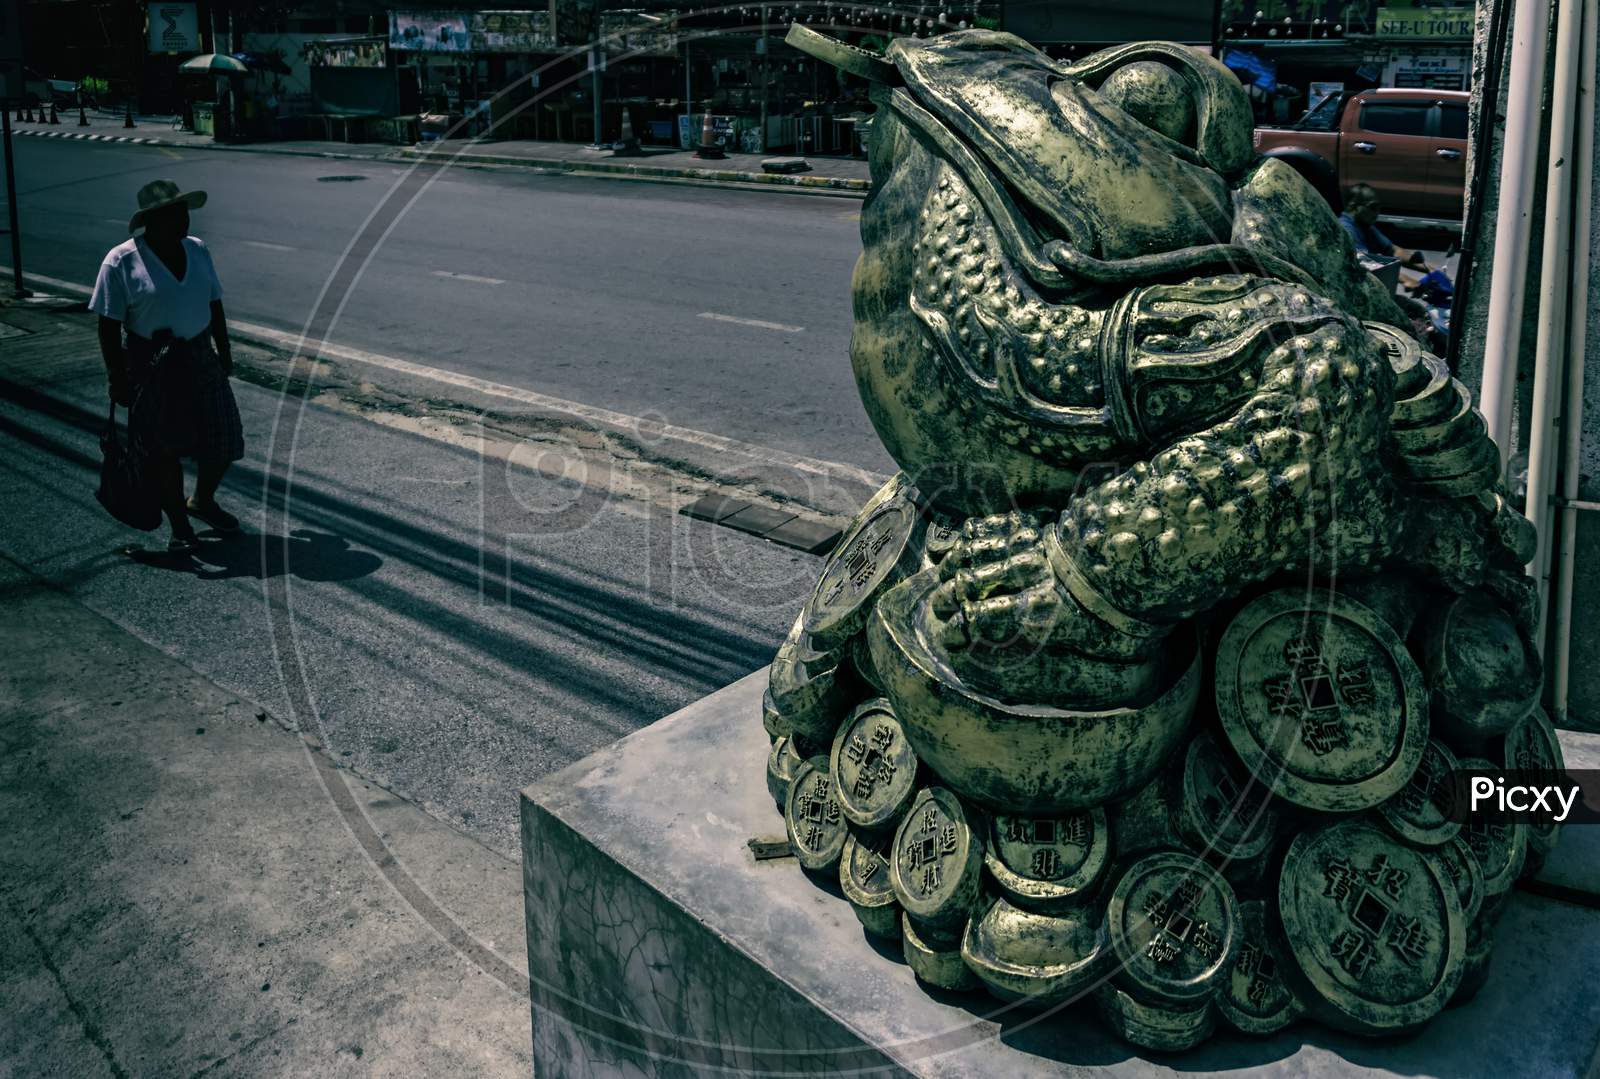 Pattaya,Thailand - October 21,2019:Second Road This Is A Big Sculpture Of Greedy,Ugly Frog,Which Is Only Interested In Making Money.